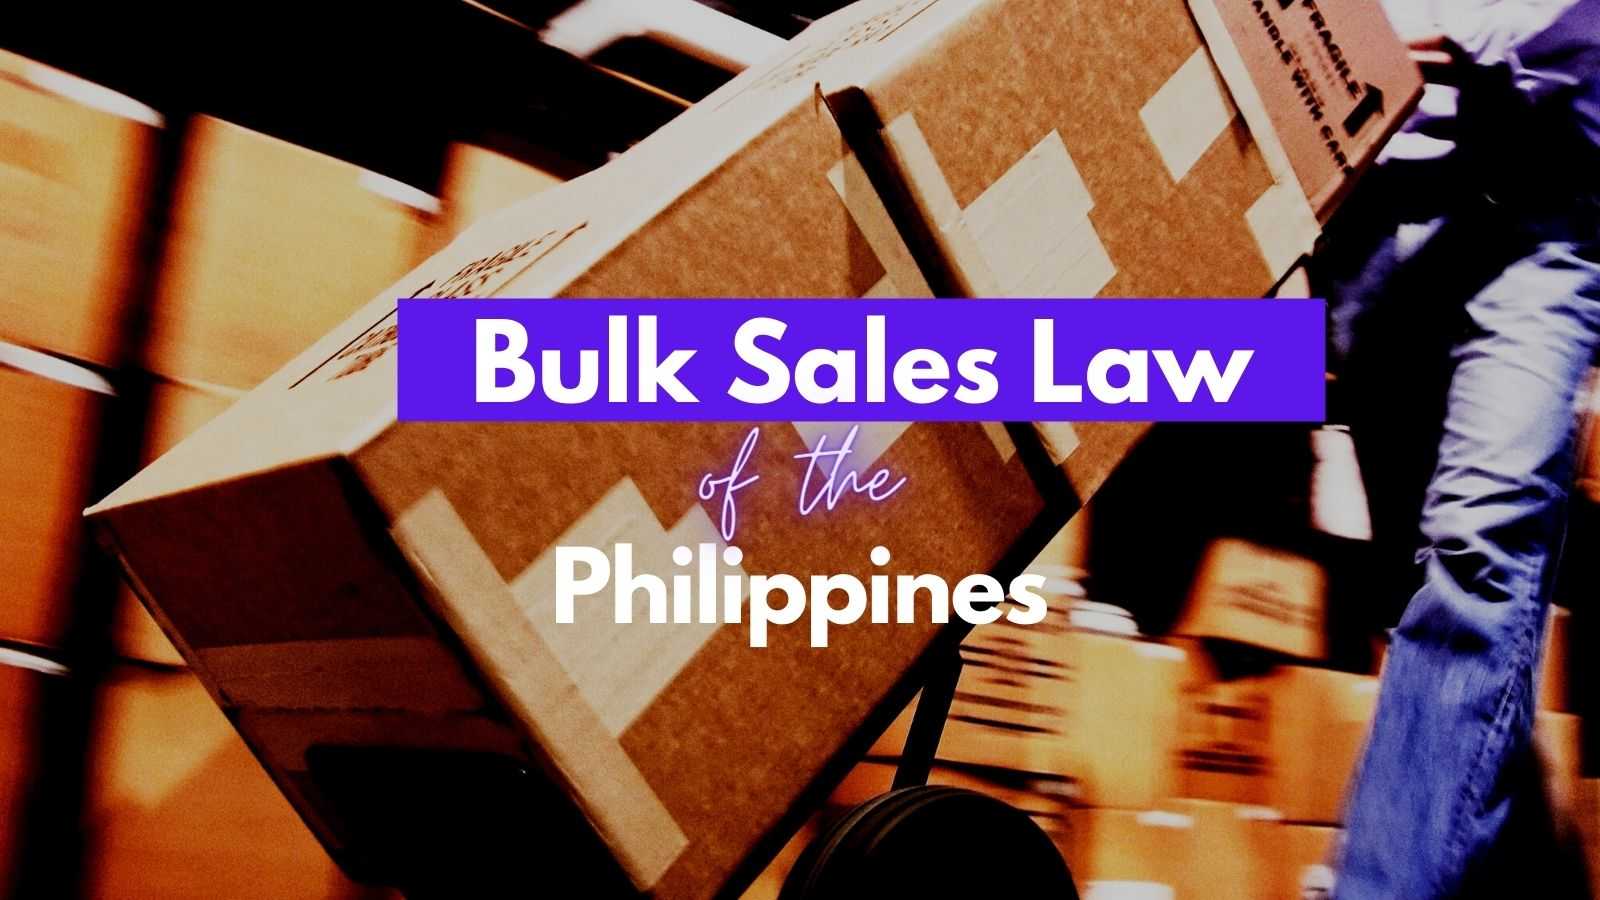 The Bulk Sales Law of the Philippines (Republic Act 3952)